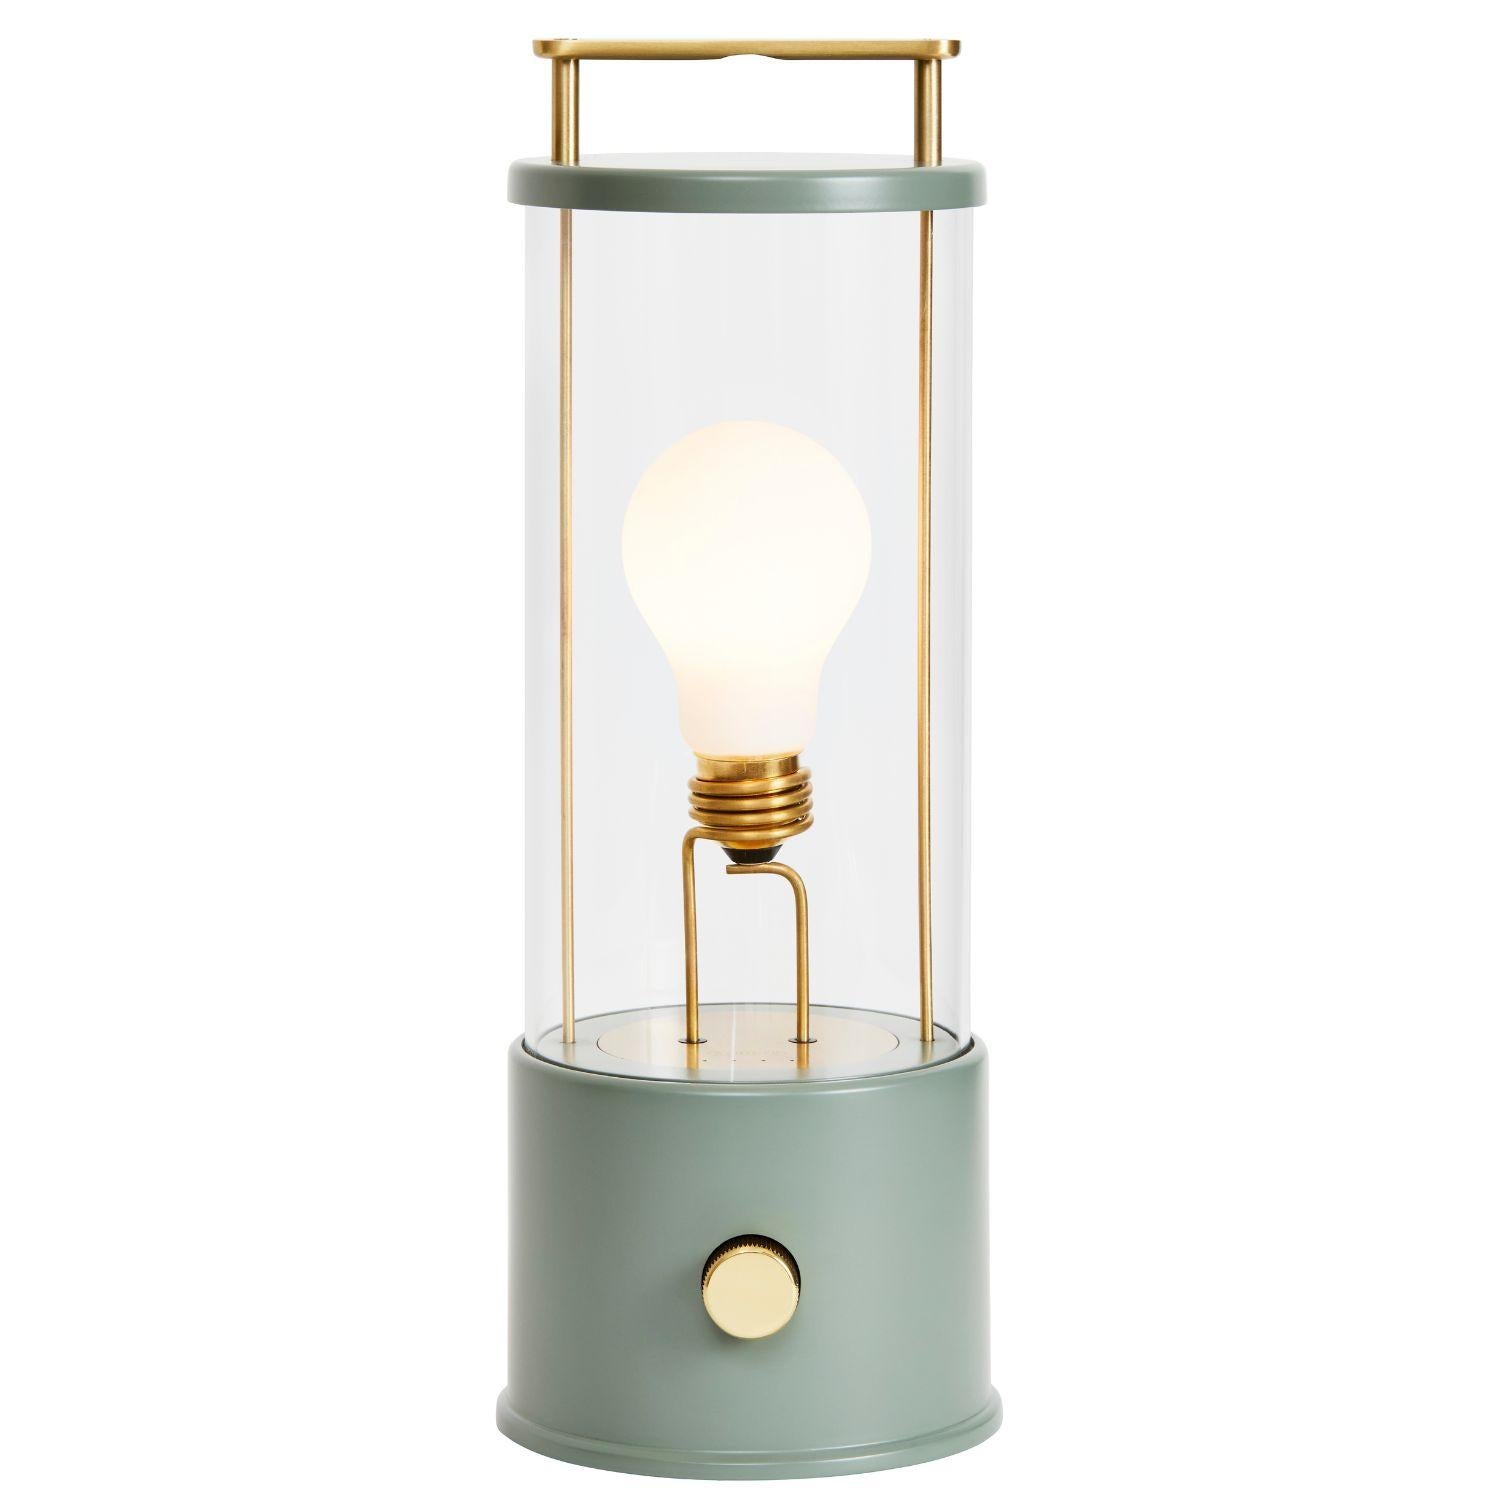 'The Muse' Portable Lamp in Selvedge Blue by Farrow & Ball for Tala For Sale 7